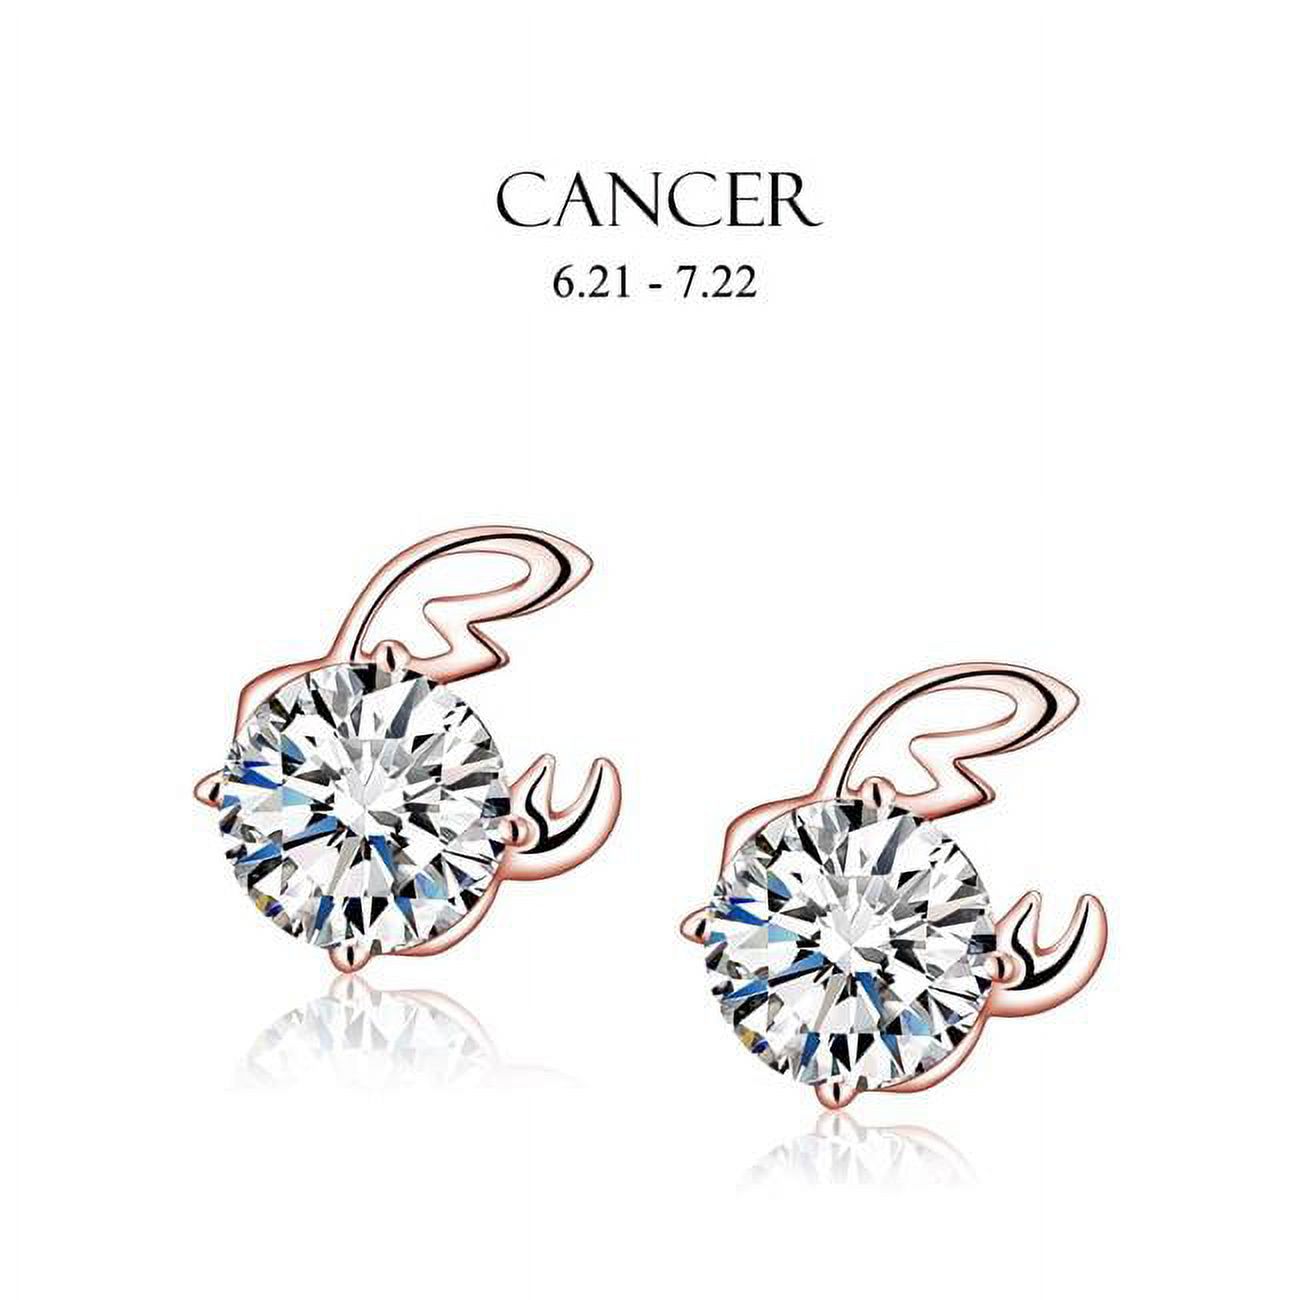 Picture of Amabel Designs E-I2CZCNR-RG Rose Gold Cubic Zirconia Cancer Stud Earrings